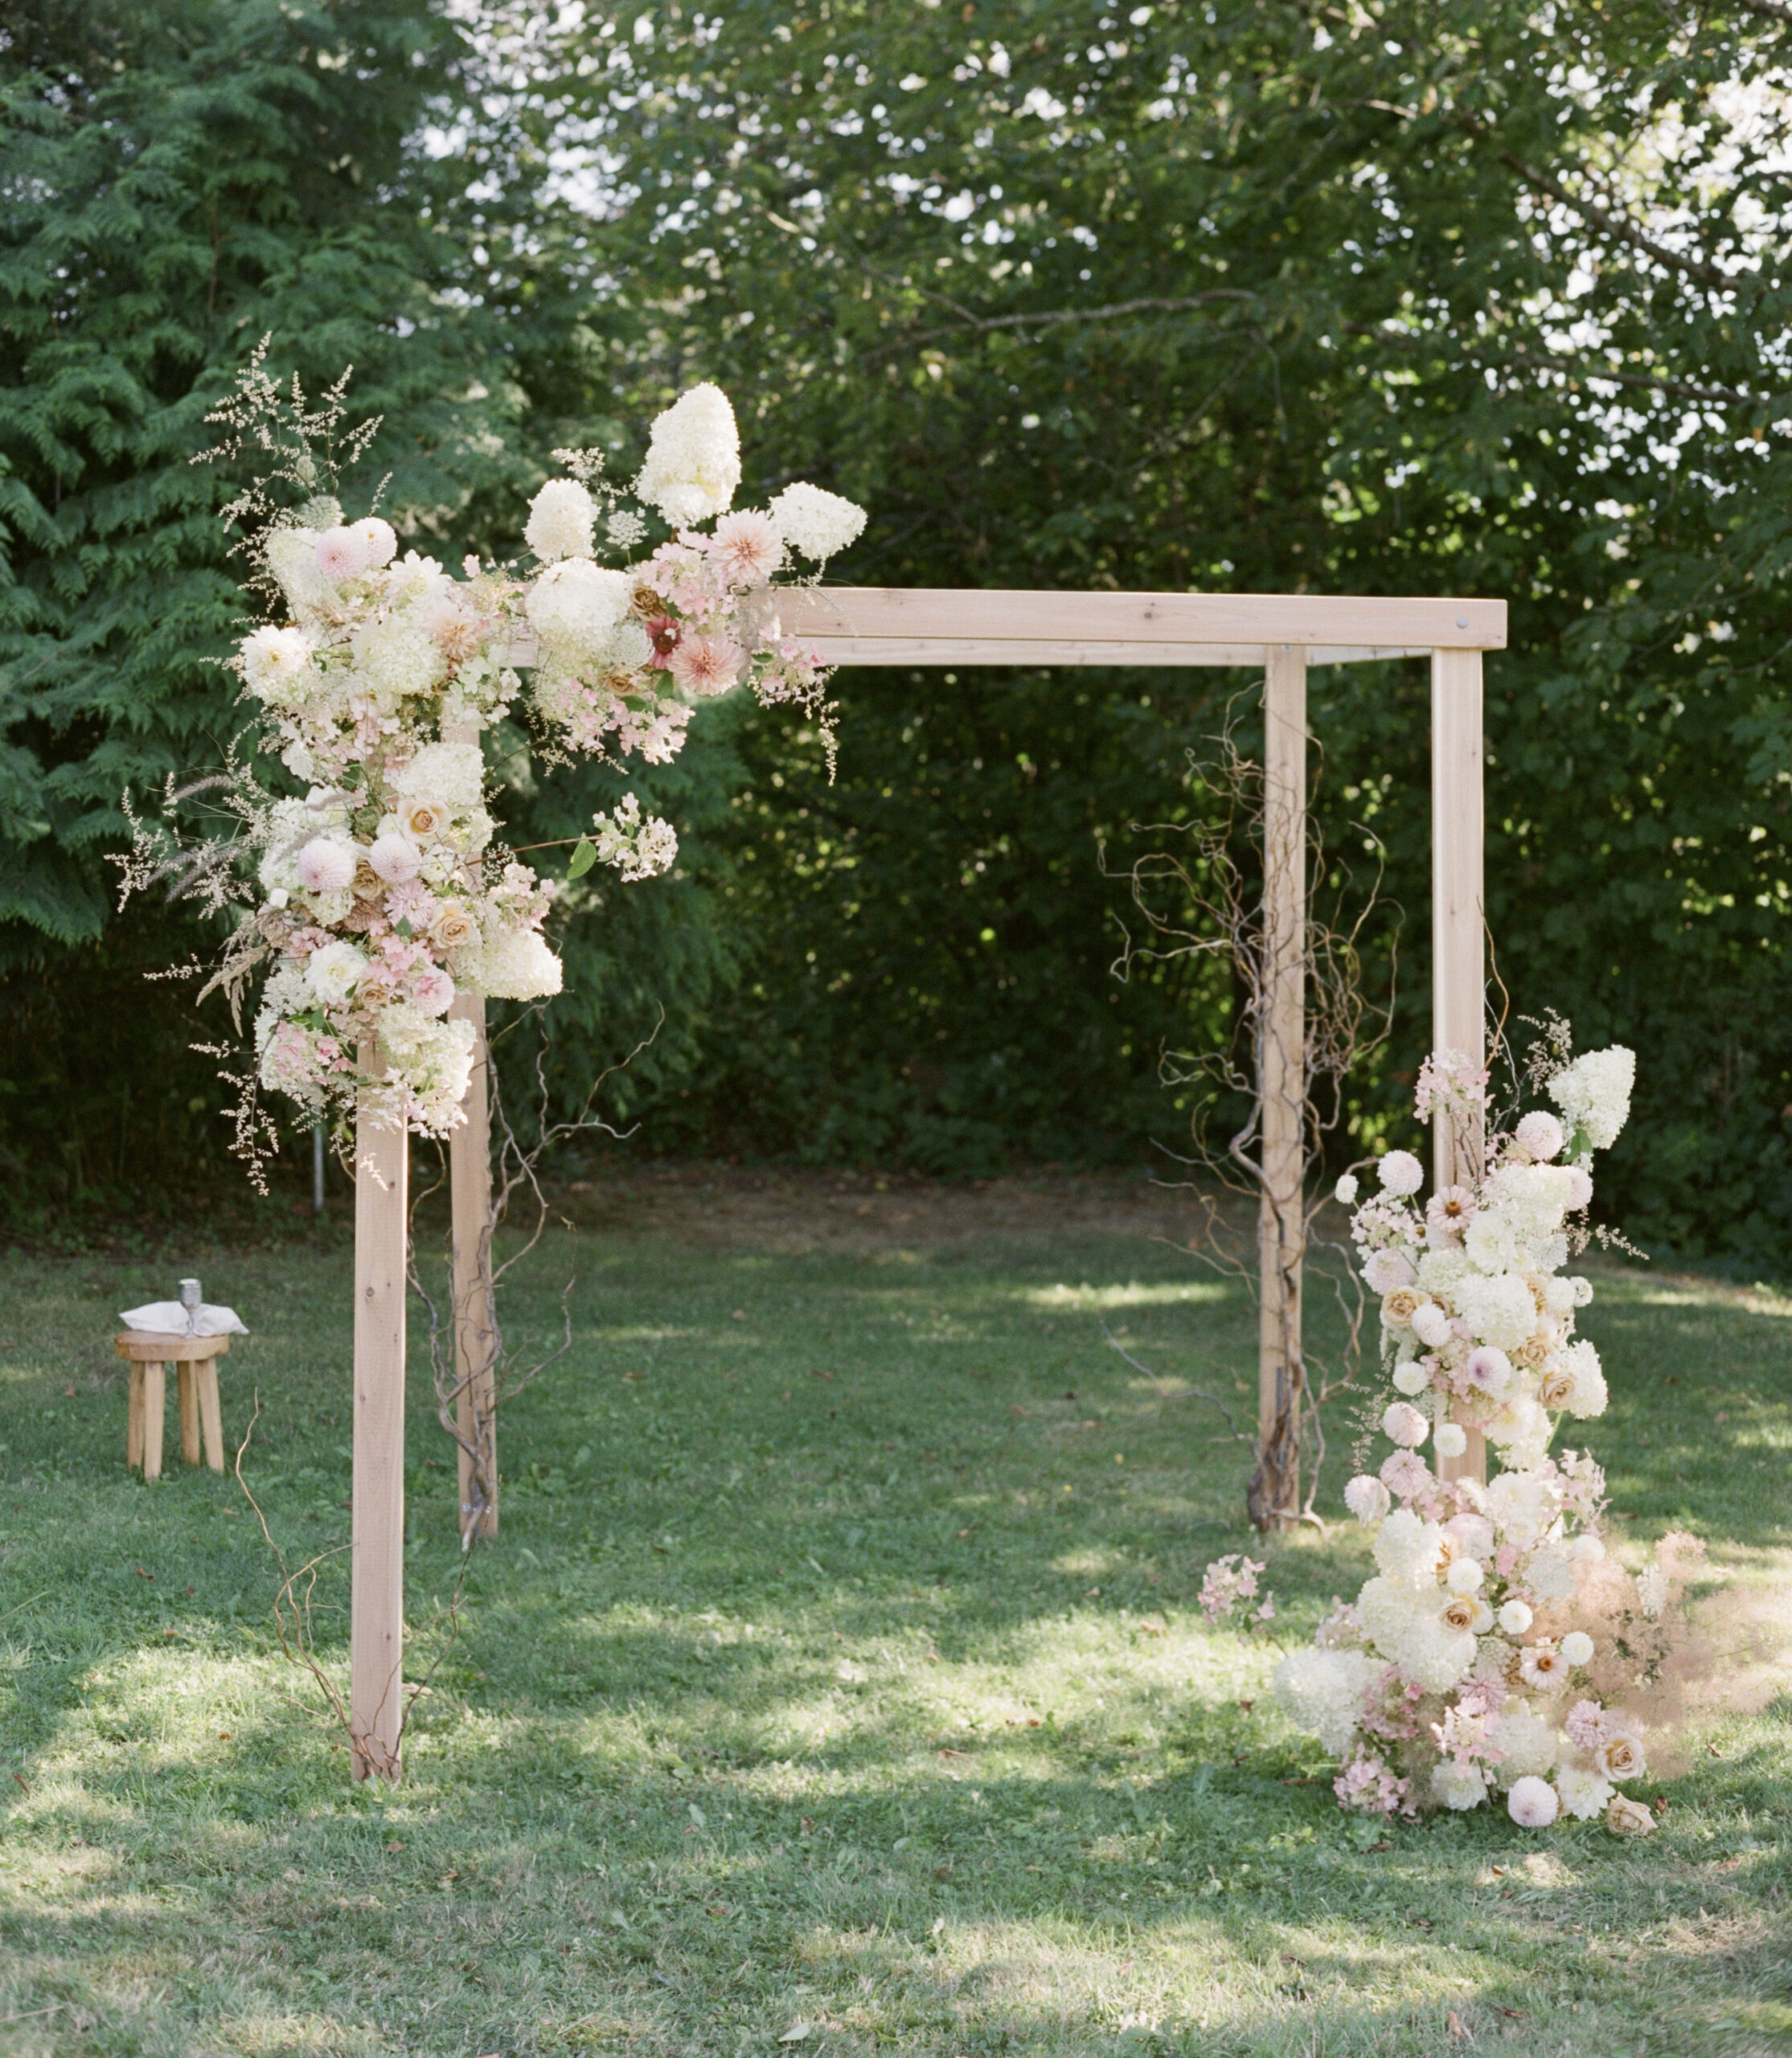 Chuppah Floral Installation for a Summer Wedding designed by Seattle wedding florist Noctua Florals